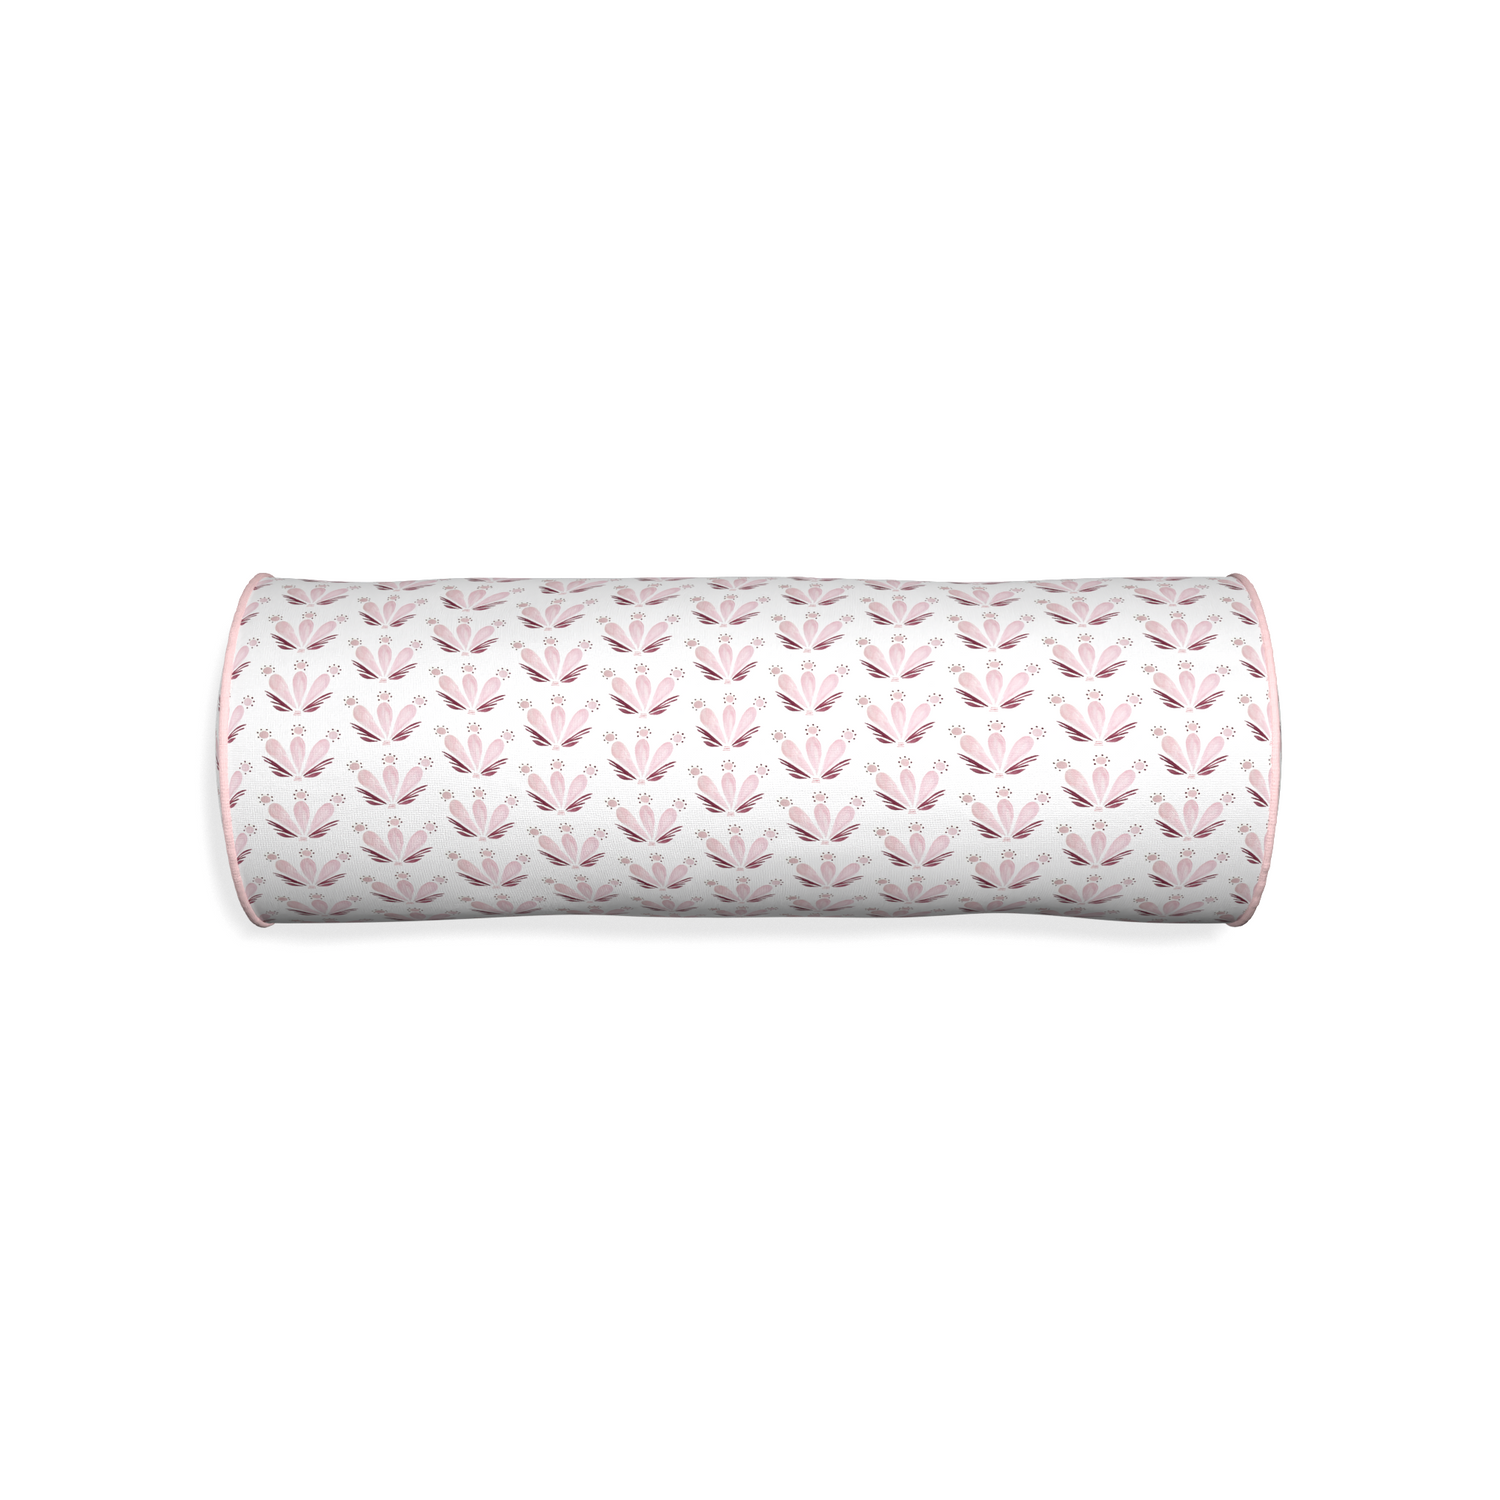 Bolster serena pink custom pillow with petal piping on white background